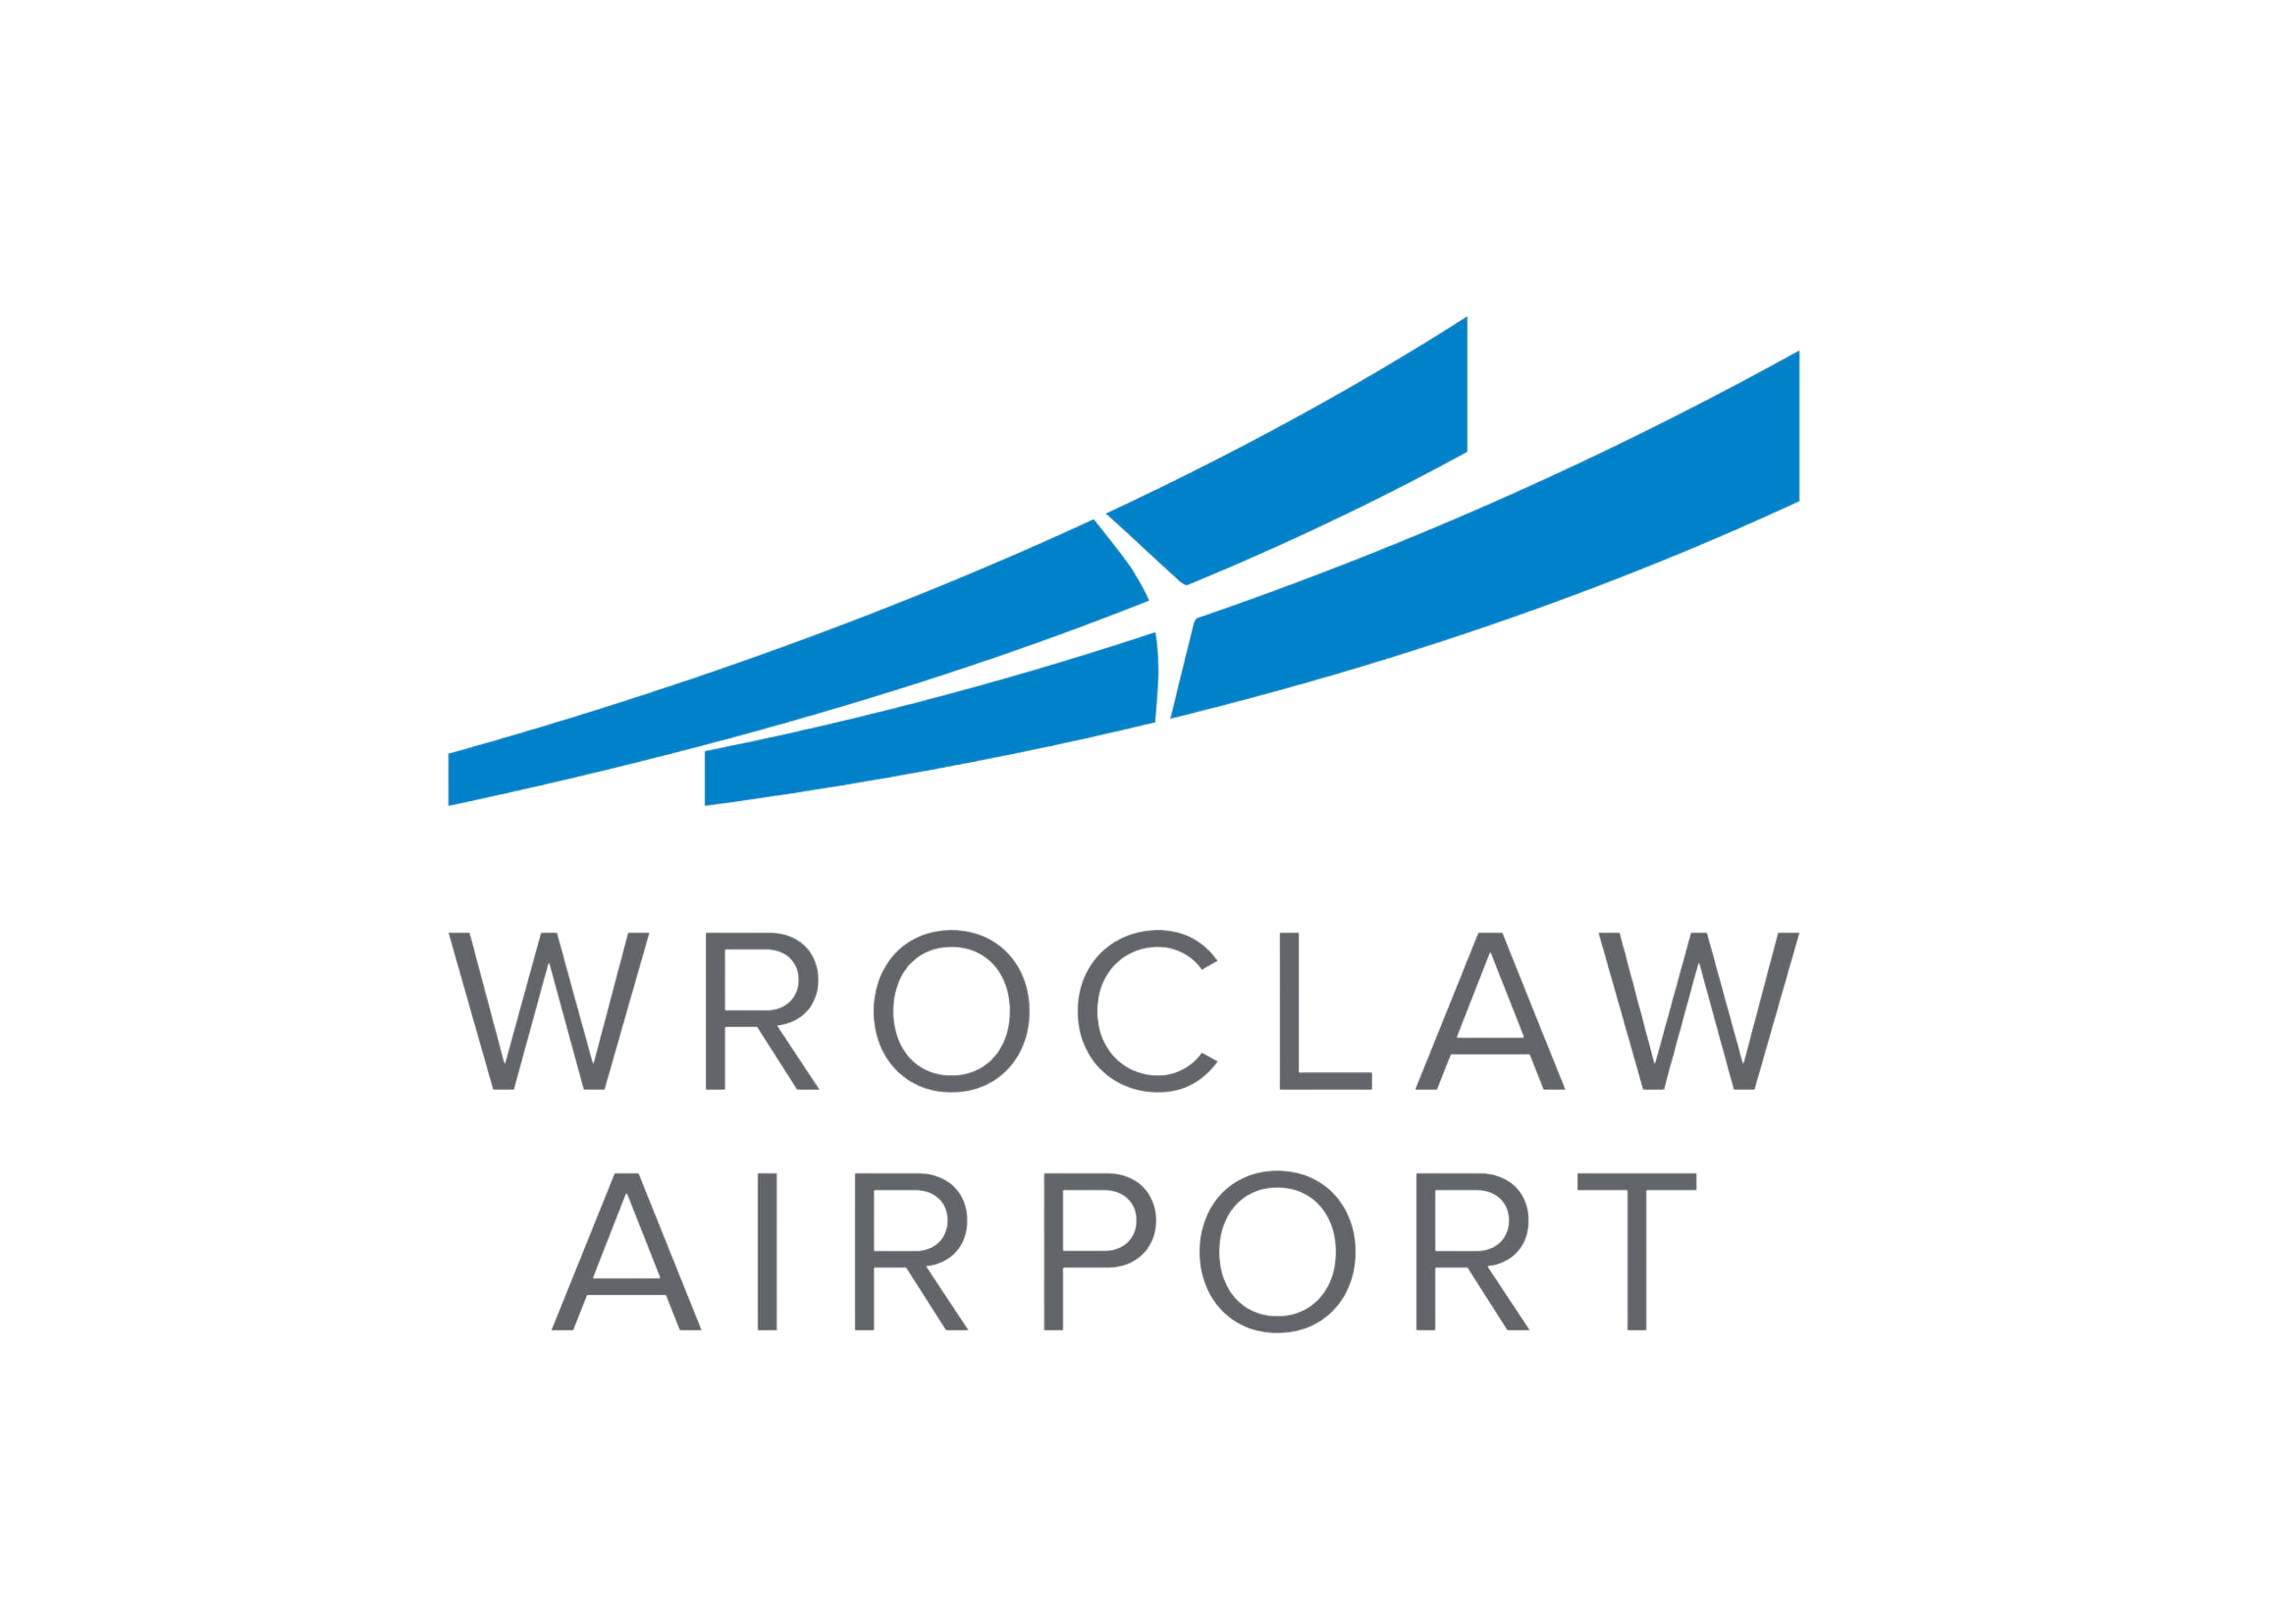 Wroclaw airport logo on a black background.